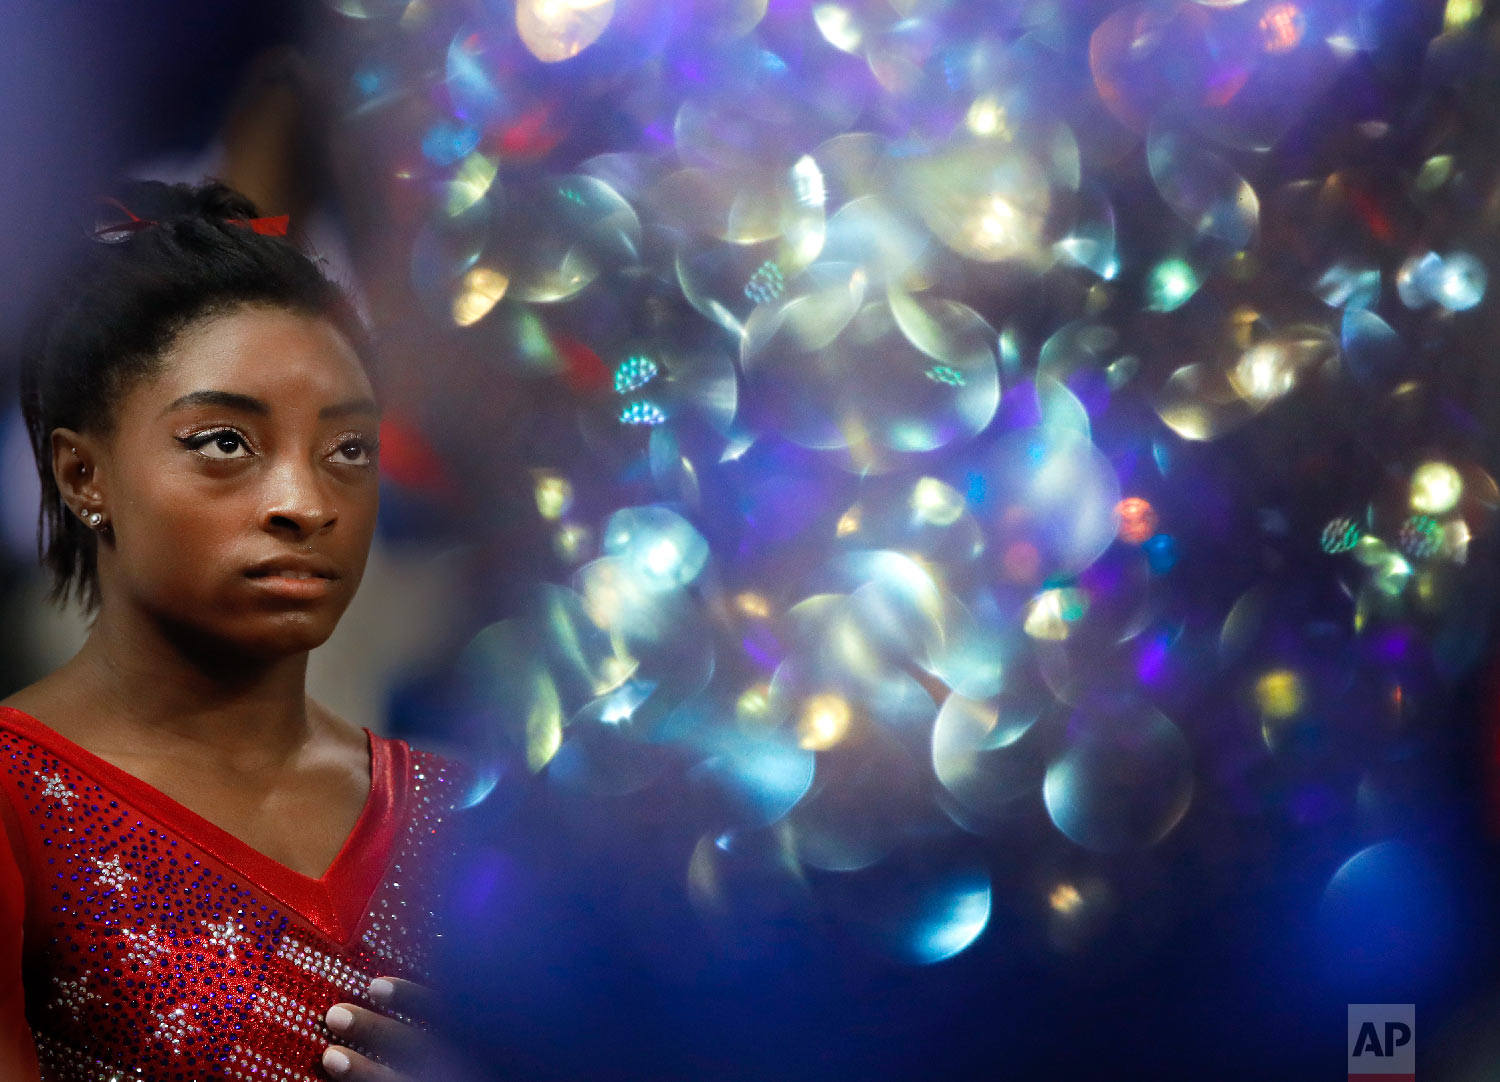  New world champion Simone Biles of the U.S. waits for the medal ceremony as the light bounces off a Russian gymnasts suit after the women's team final of the Gymnastics World Chamionships at the Aspire Dome in Doha, Qatar on Oct. 30, 2018. (AP Photo